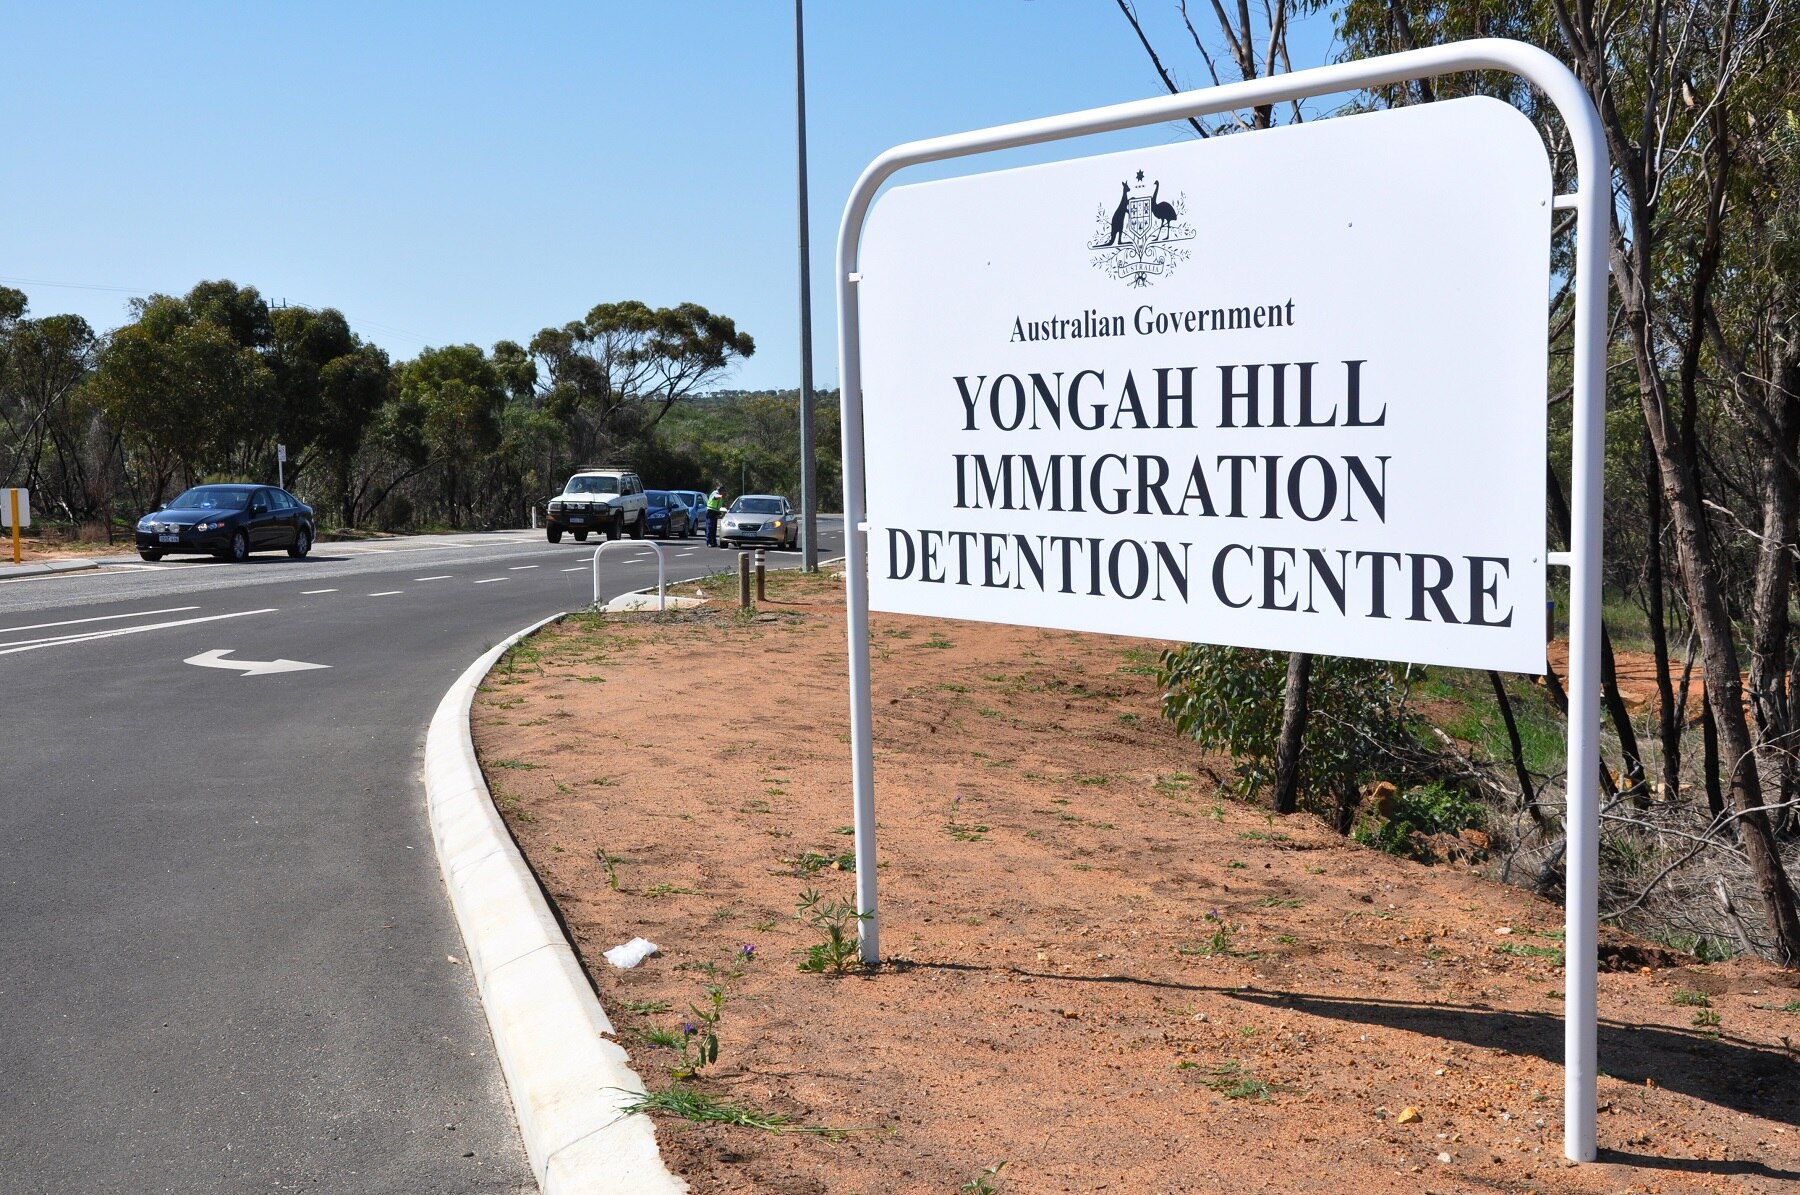 Yongah Hill Immigration Detention Centre in Northam, Western Australia